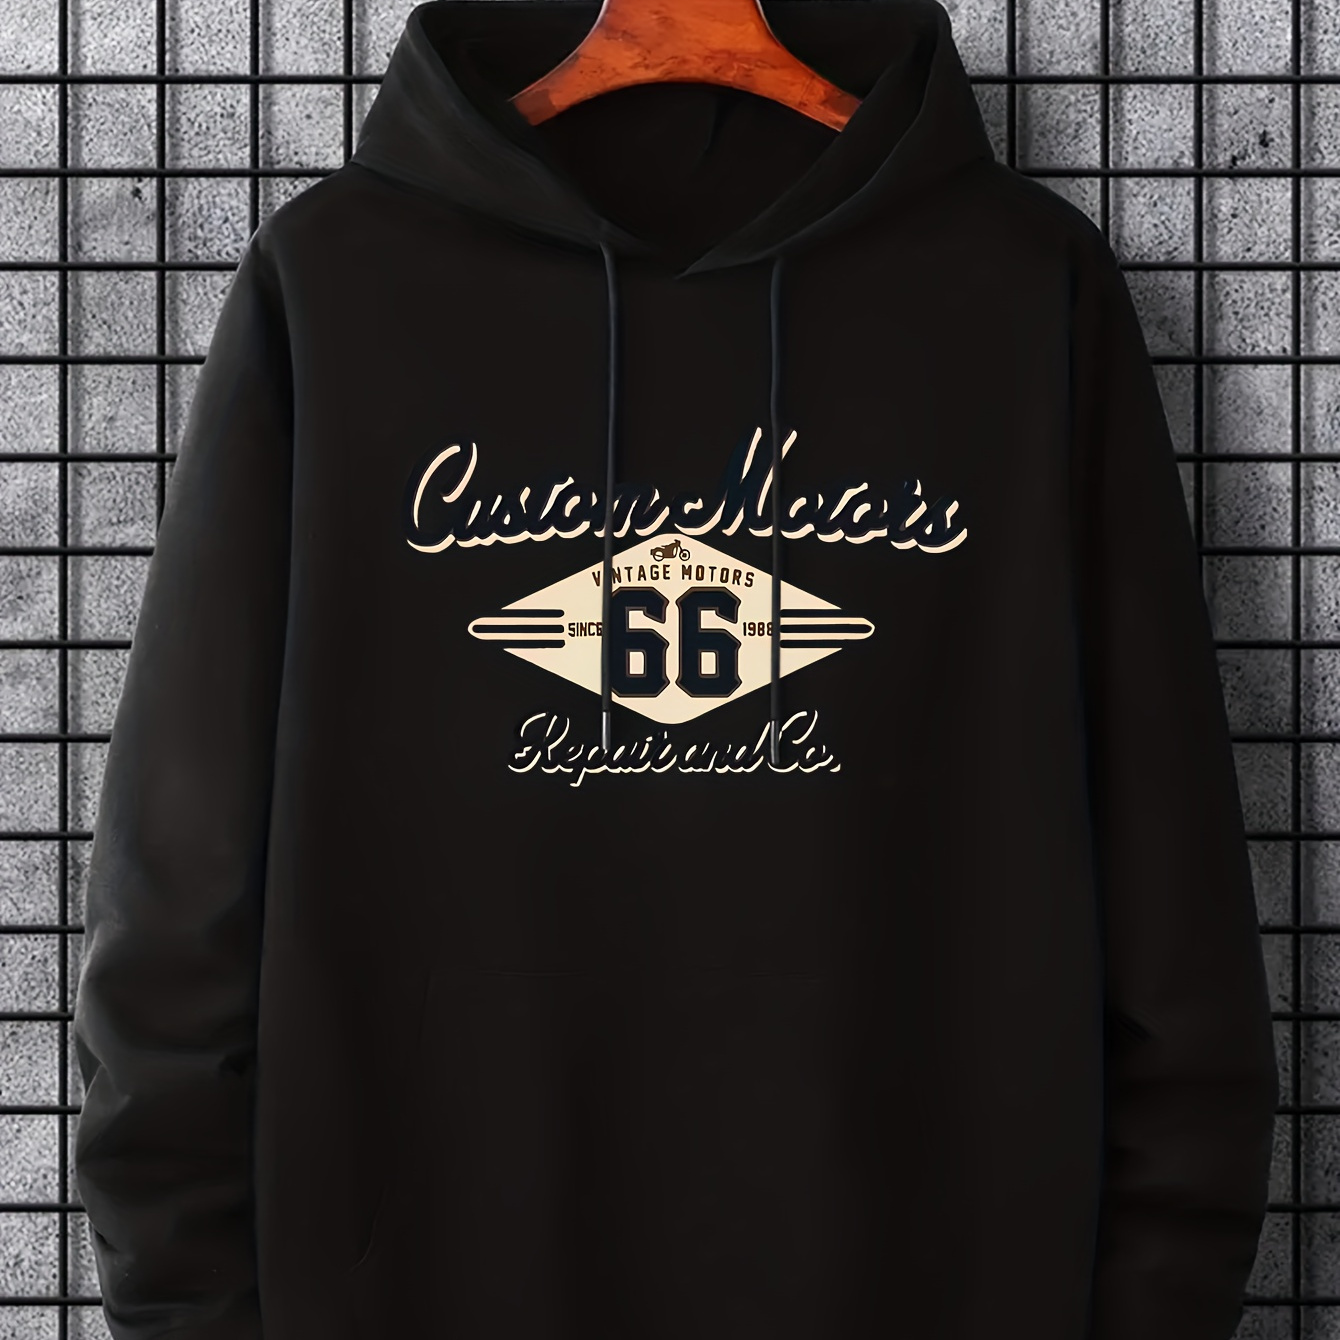 

Number 66 Letters Print Hoodie, Cool Hoodies For Men, Men's Casual Graphic Design Drawstring Pullover Hooded Sweatshirt With Kangaroo Pocket Streetwear For Winter Fall, As Gifts